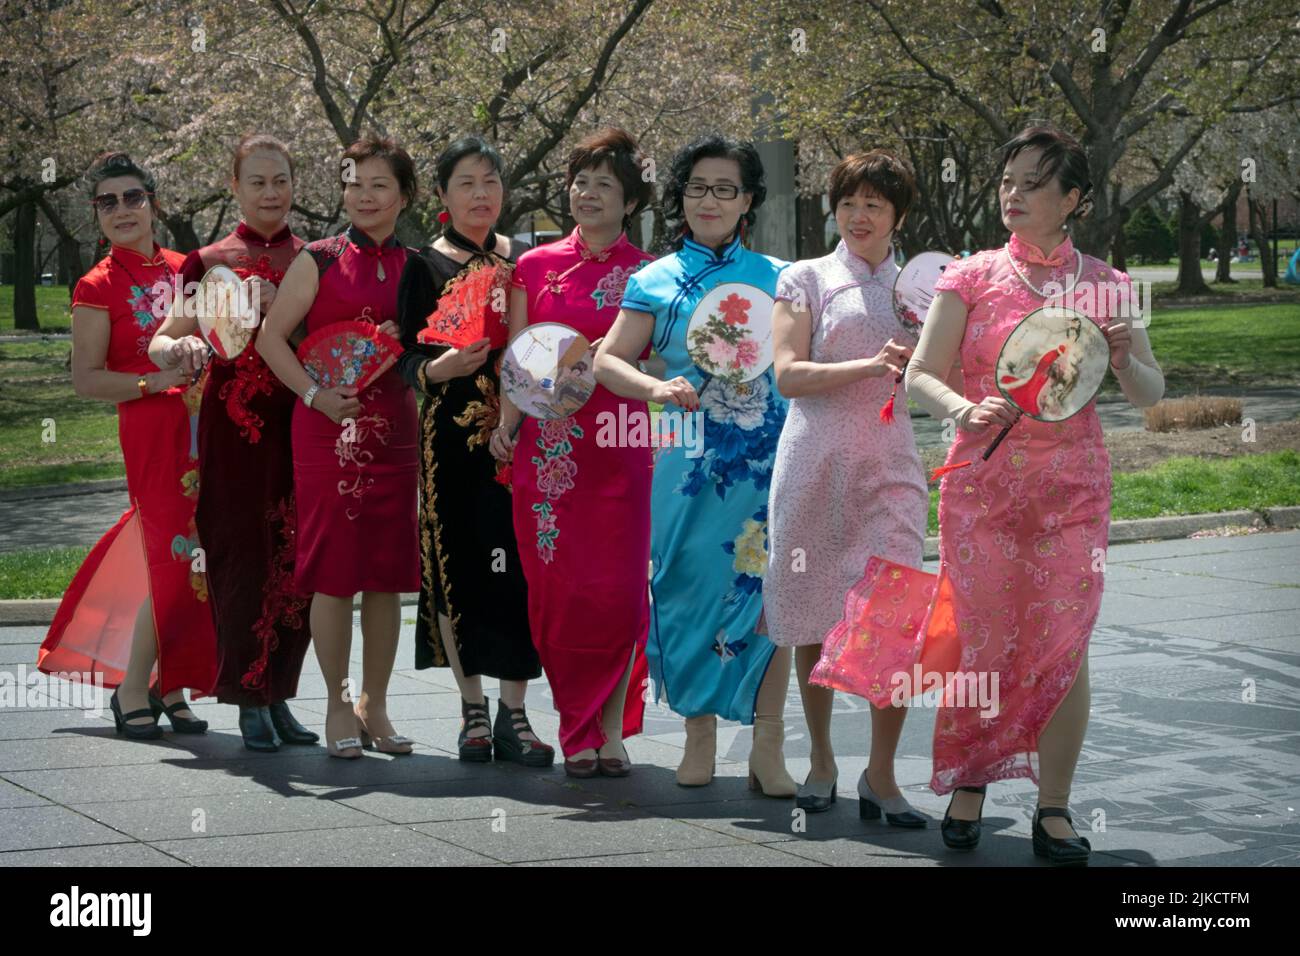 8 Chinese American members of a dance group pose for photos holding their fans. In Flushing Meadows Corona Park in Queens, New York City. Stock Photo